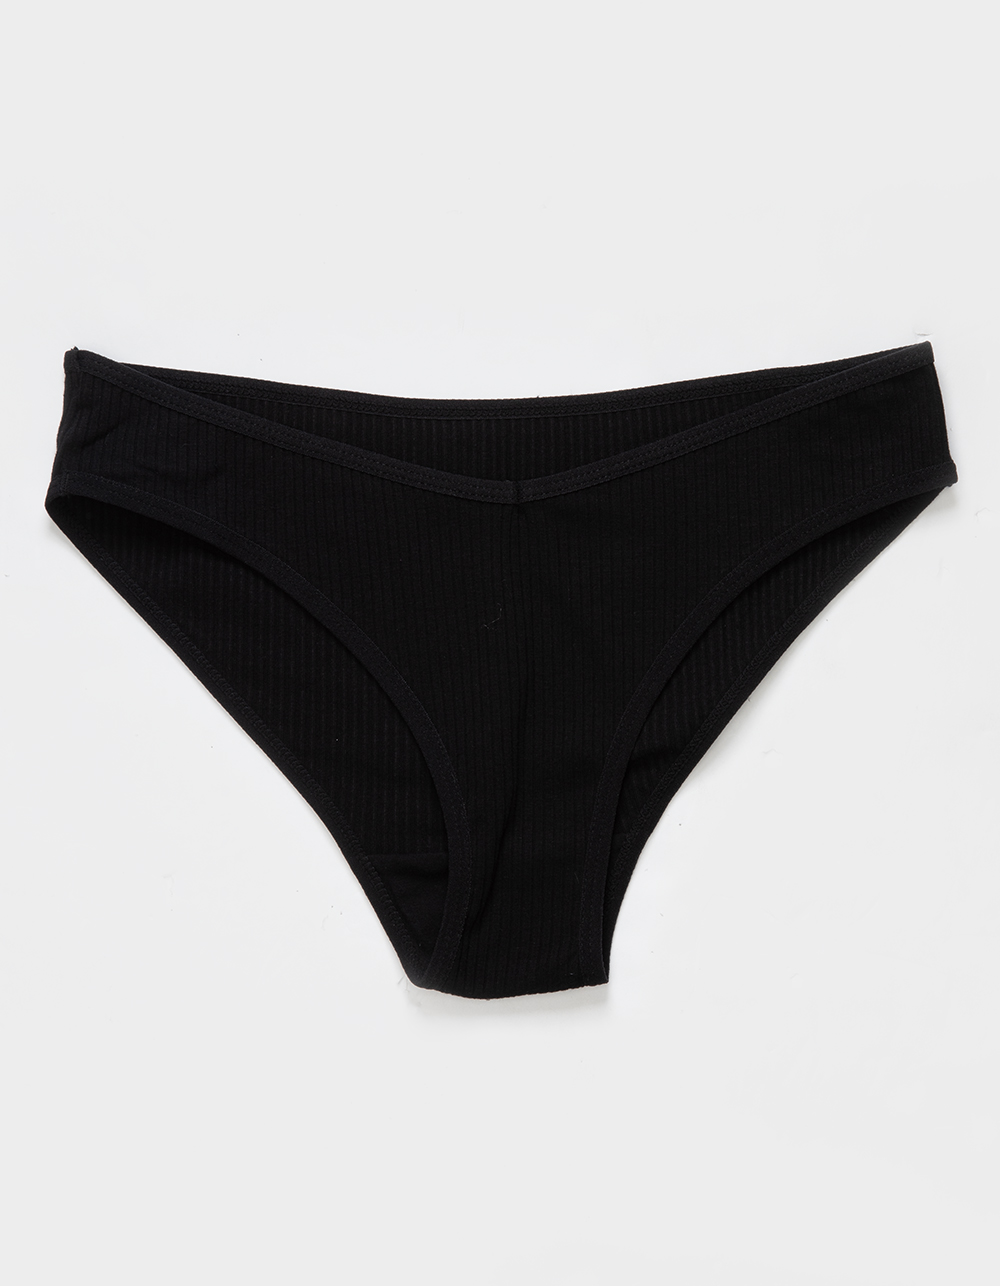 5 for $15 Panty Sale & Clearance - Soma